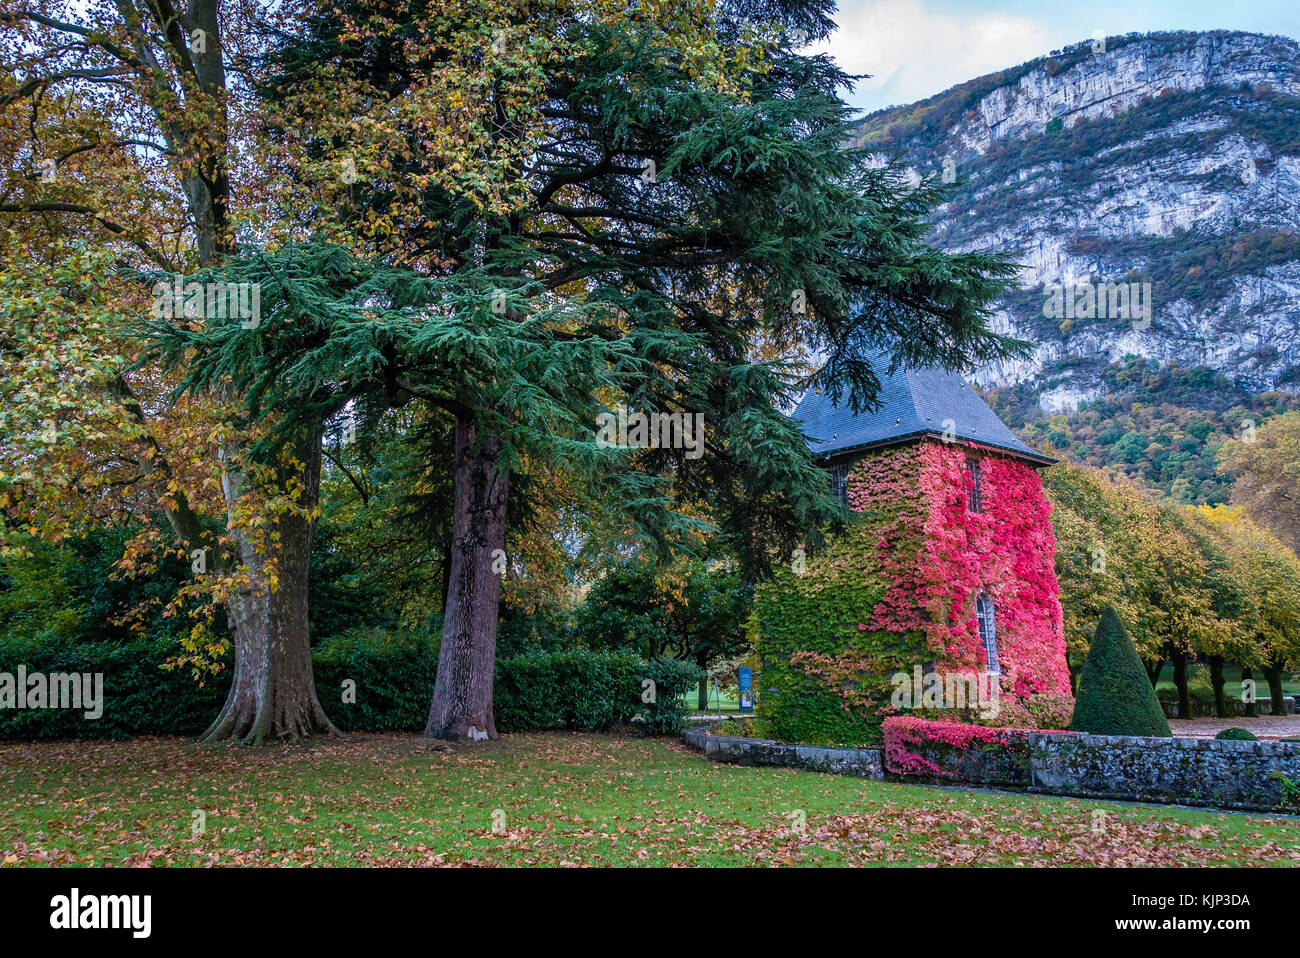 Sassenage castle in France in the autumn with splendid colors in the trees Stock Photo